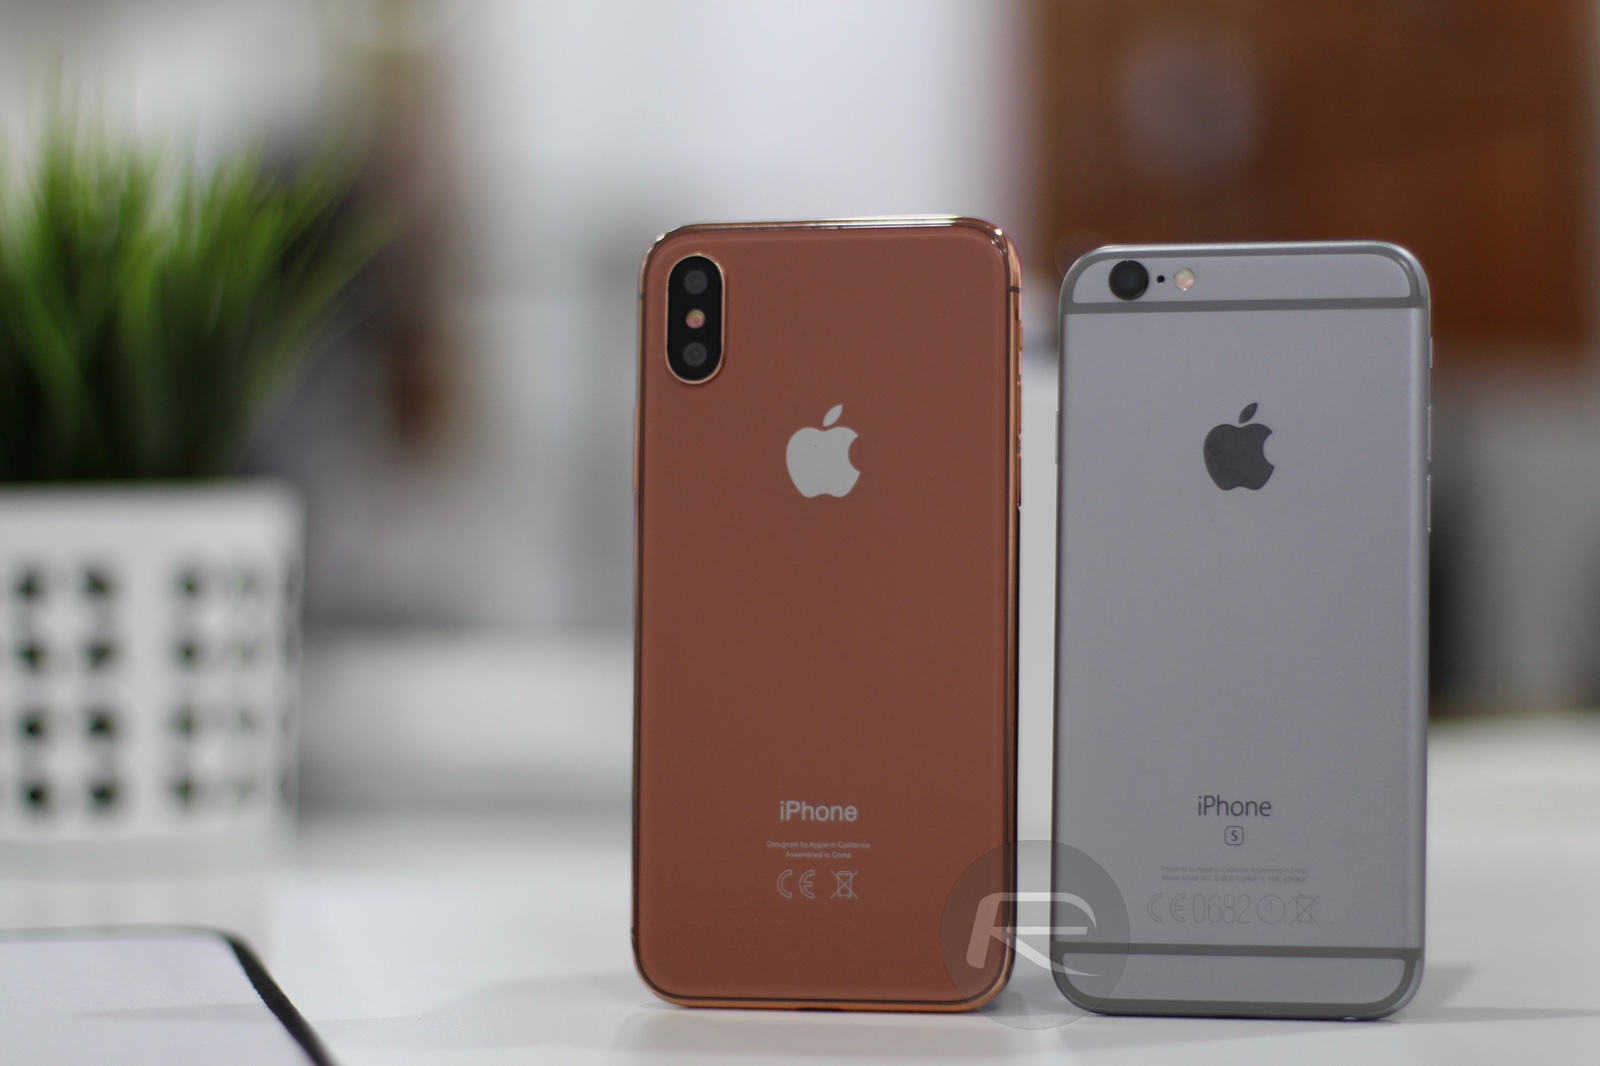 iPhone 8 blush gold with iPhone 6s